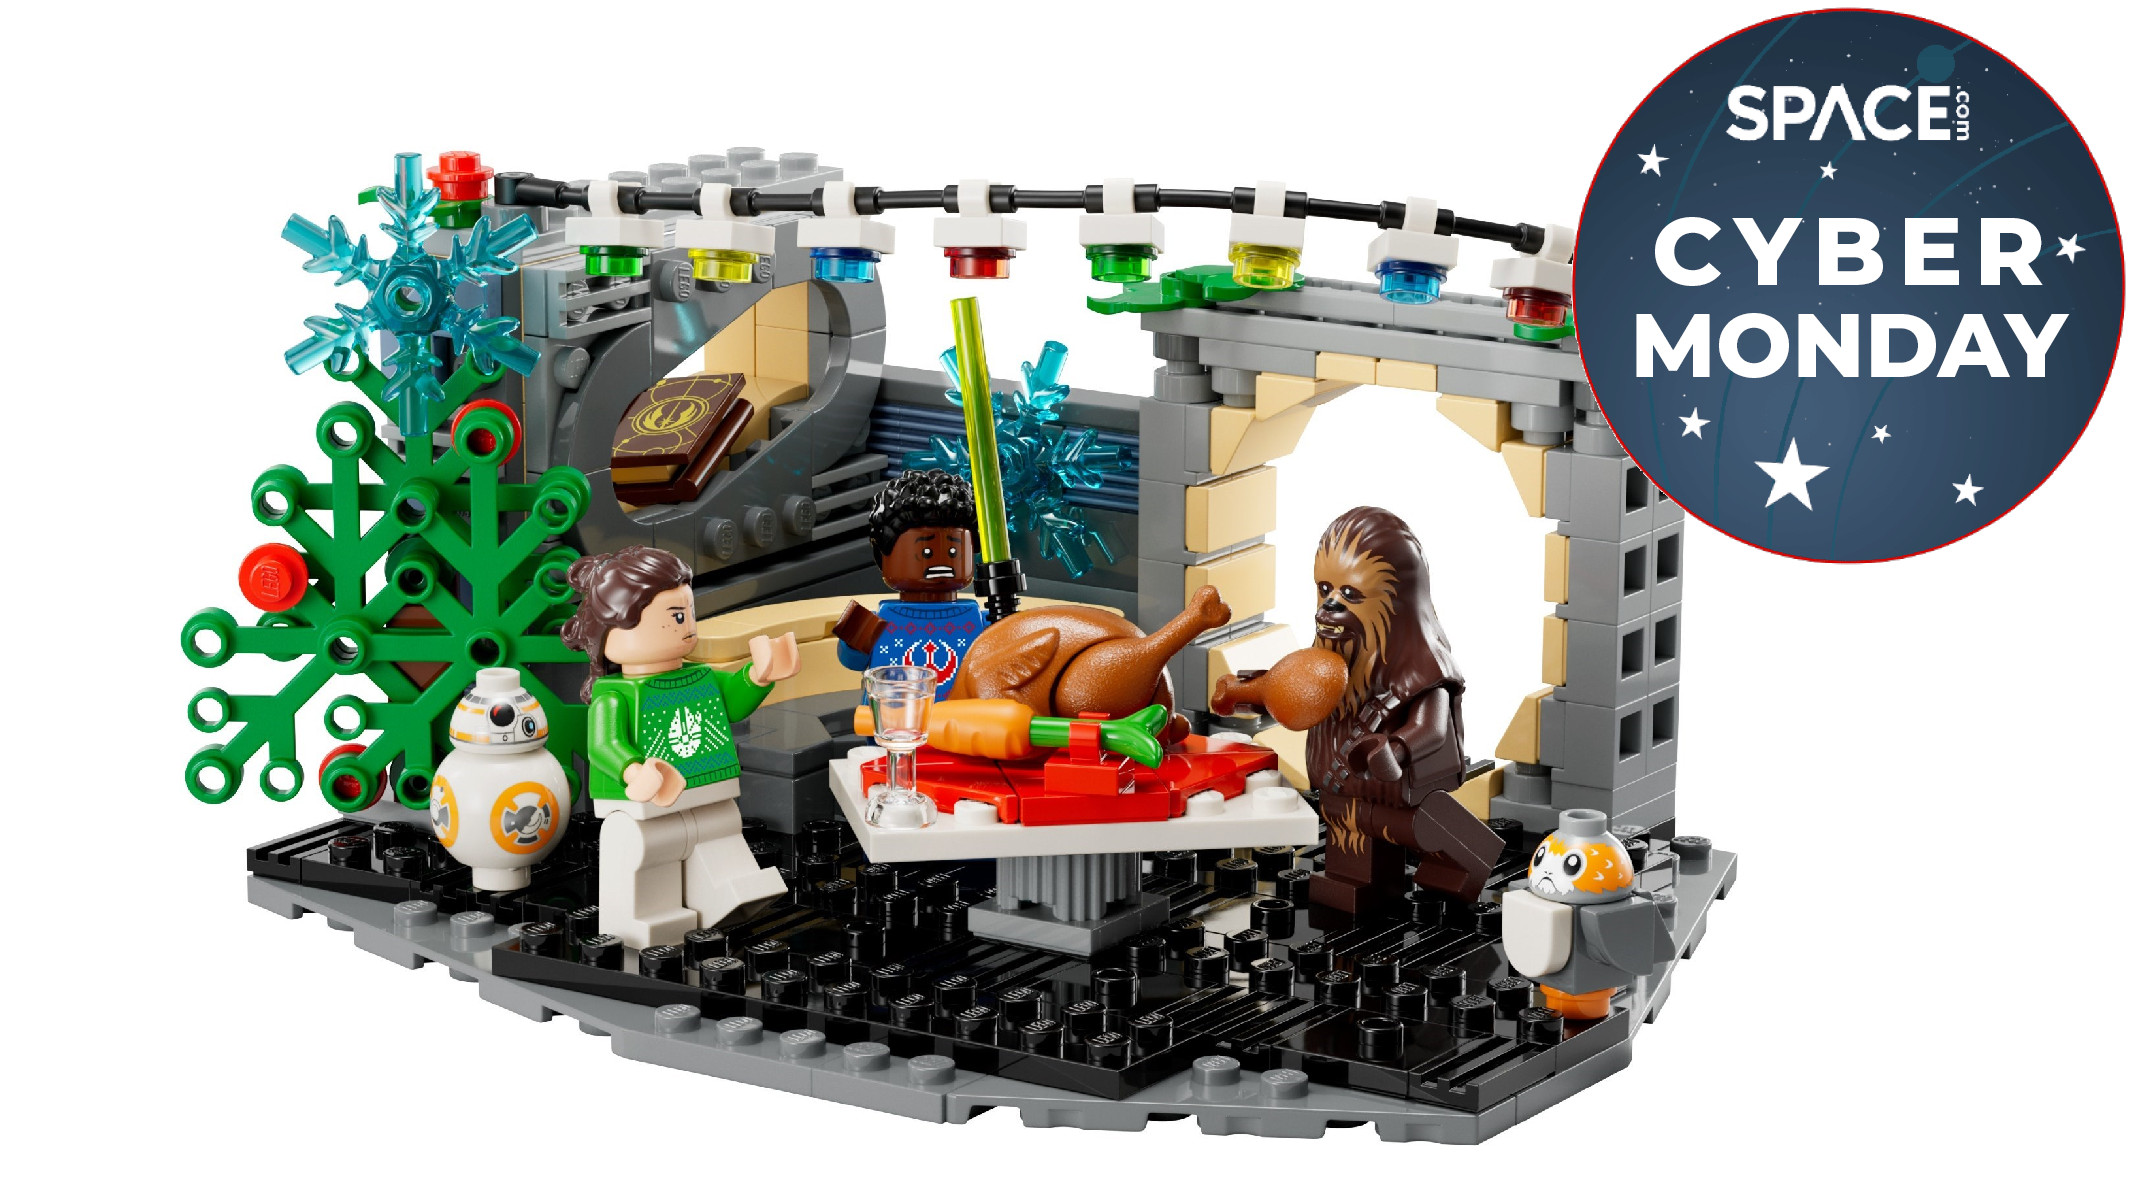 These Lego Star Wars, Pandora and other sets are all under $30 for Cyber Monday, but hurry Space